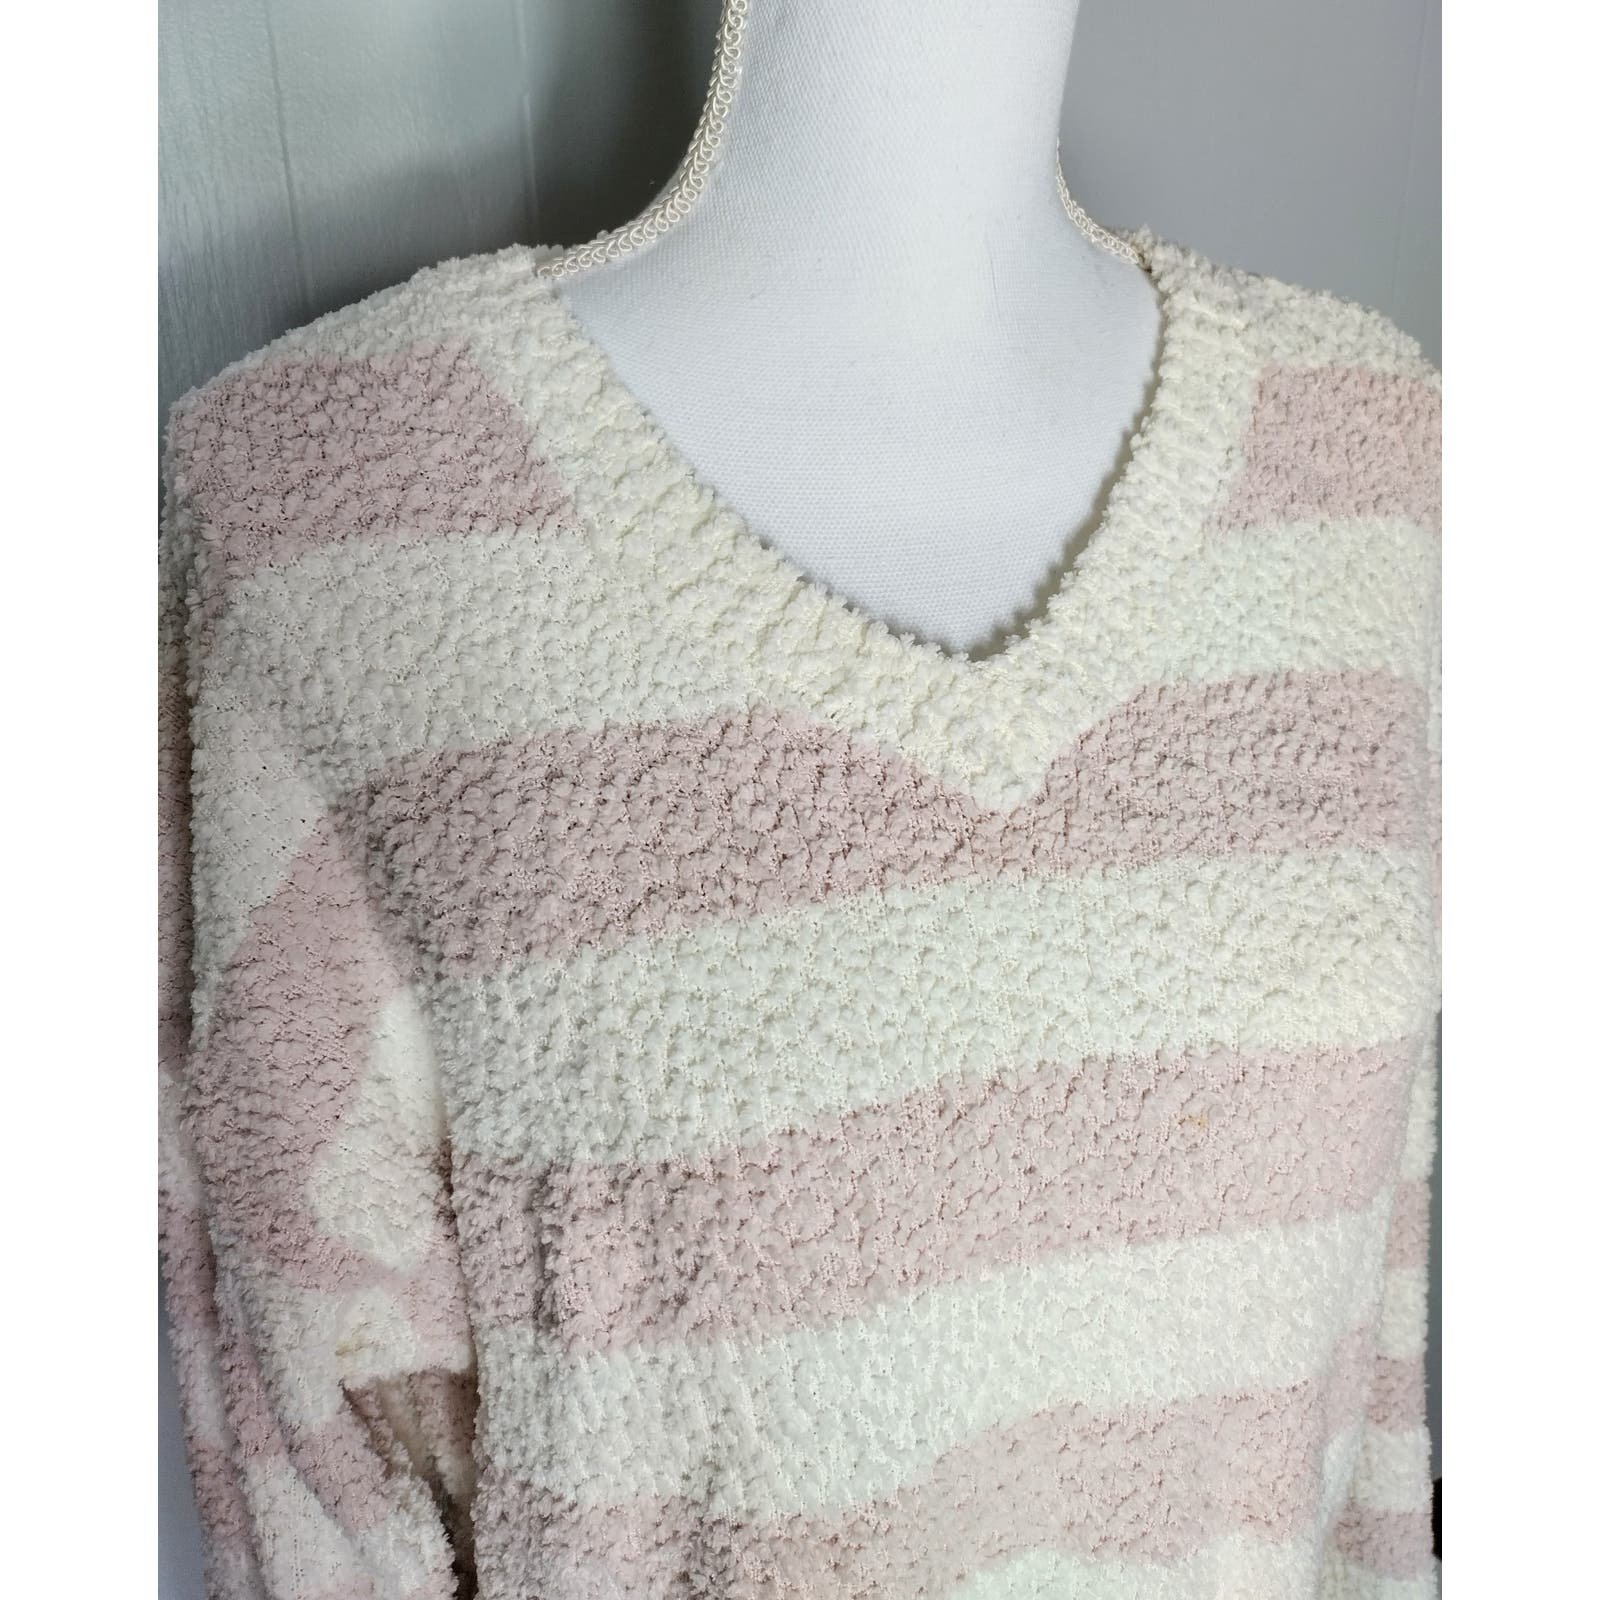 the Lowest price Sanctuary Women Soft & Cozy Pink & White V-Neck Long Sleeve High/Low Sweater NhSBz11rF hot sale